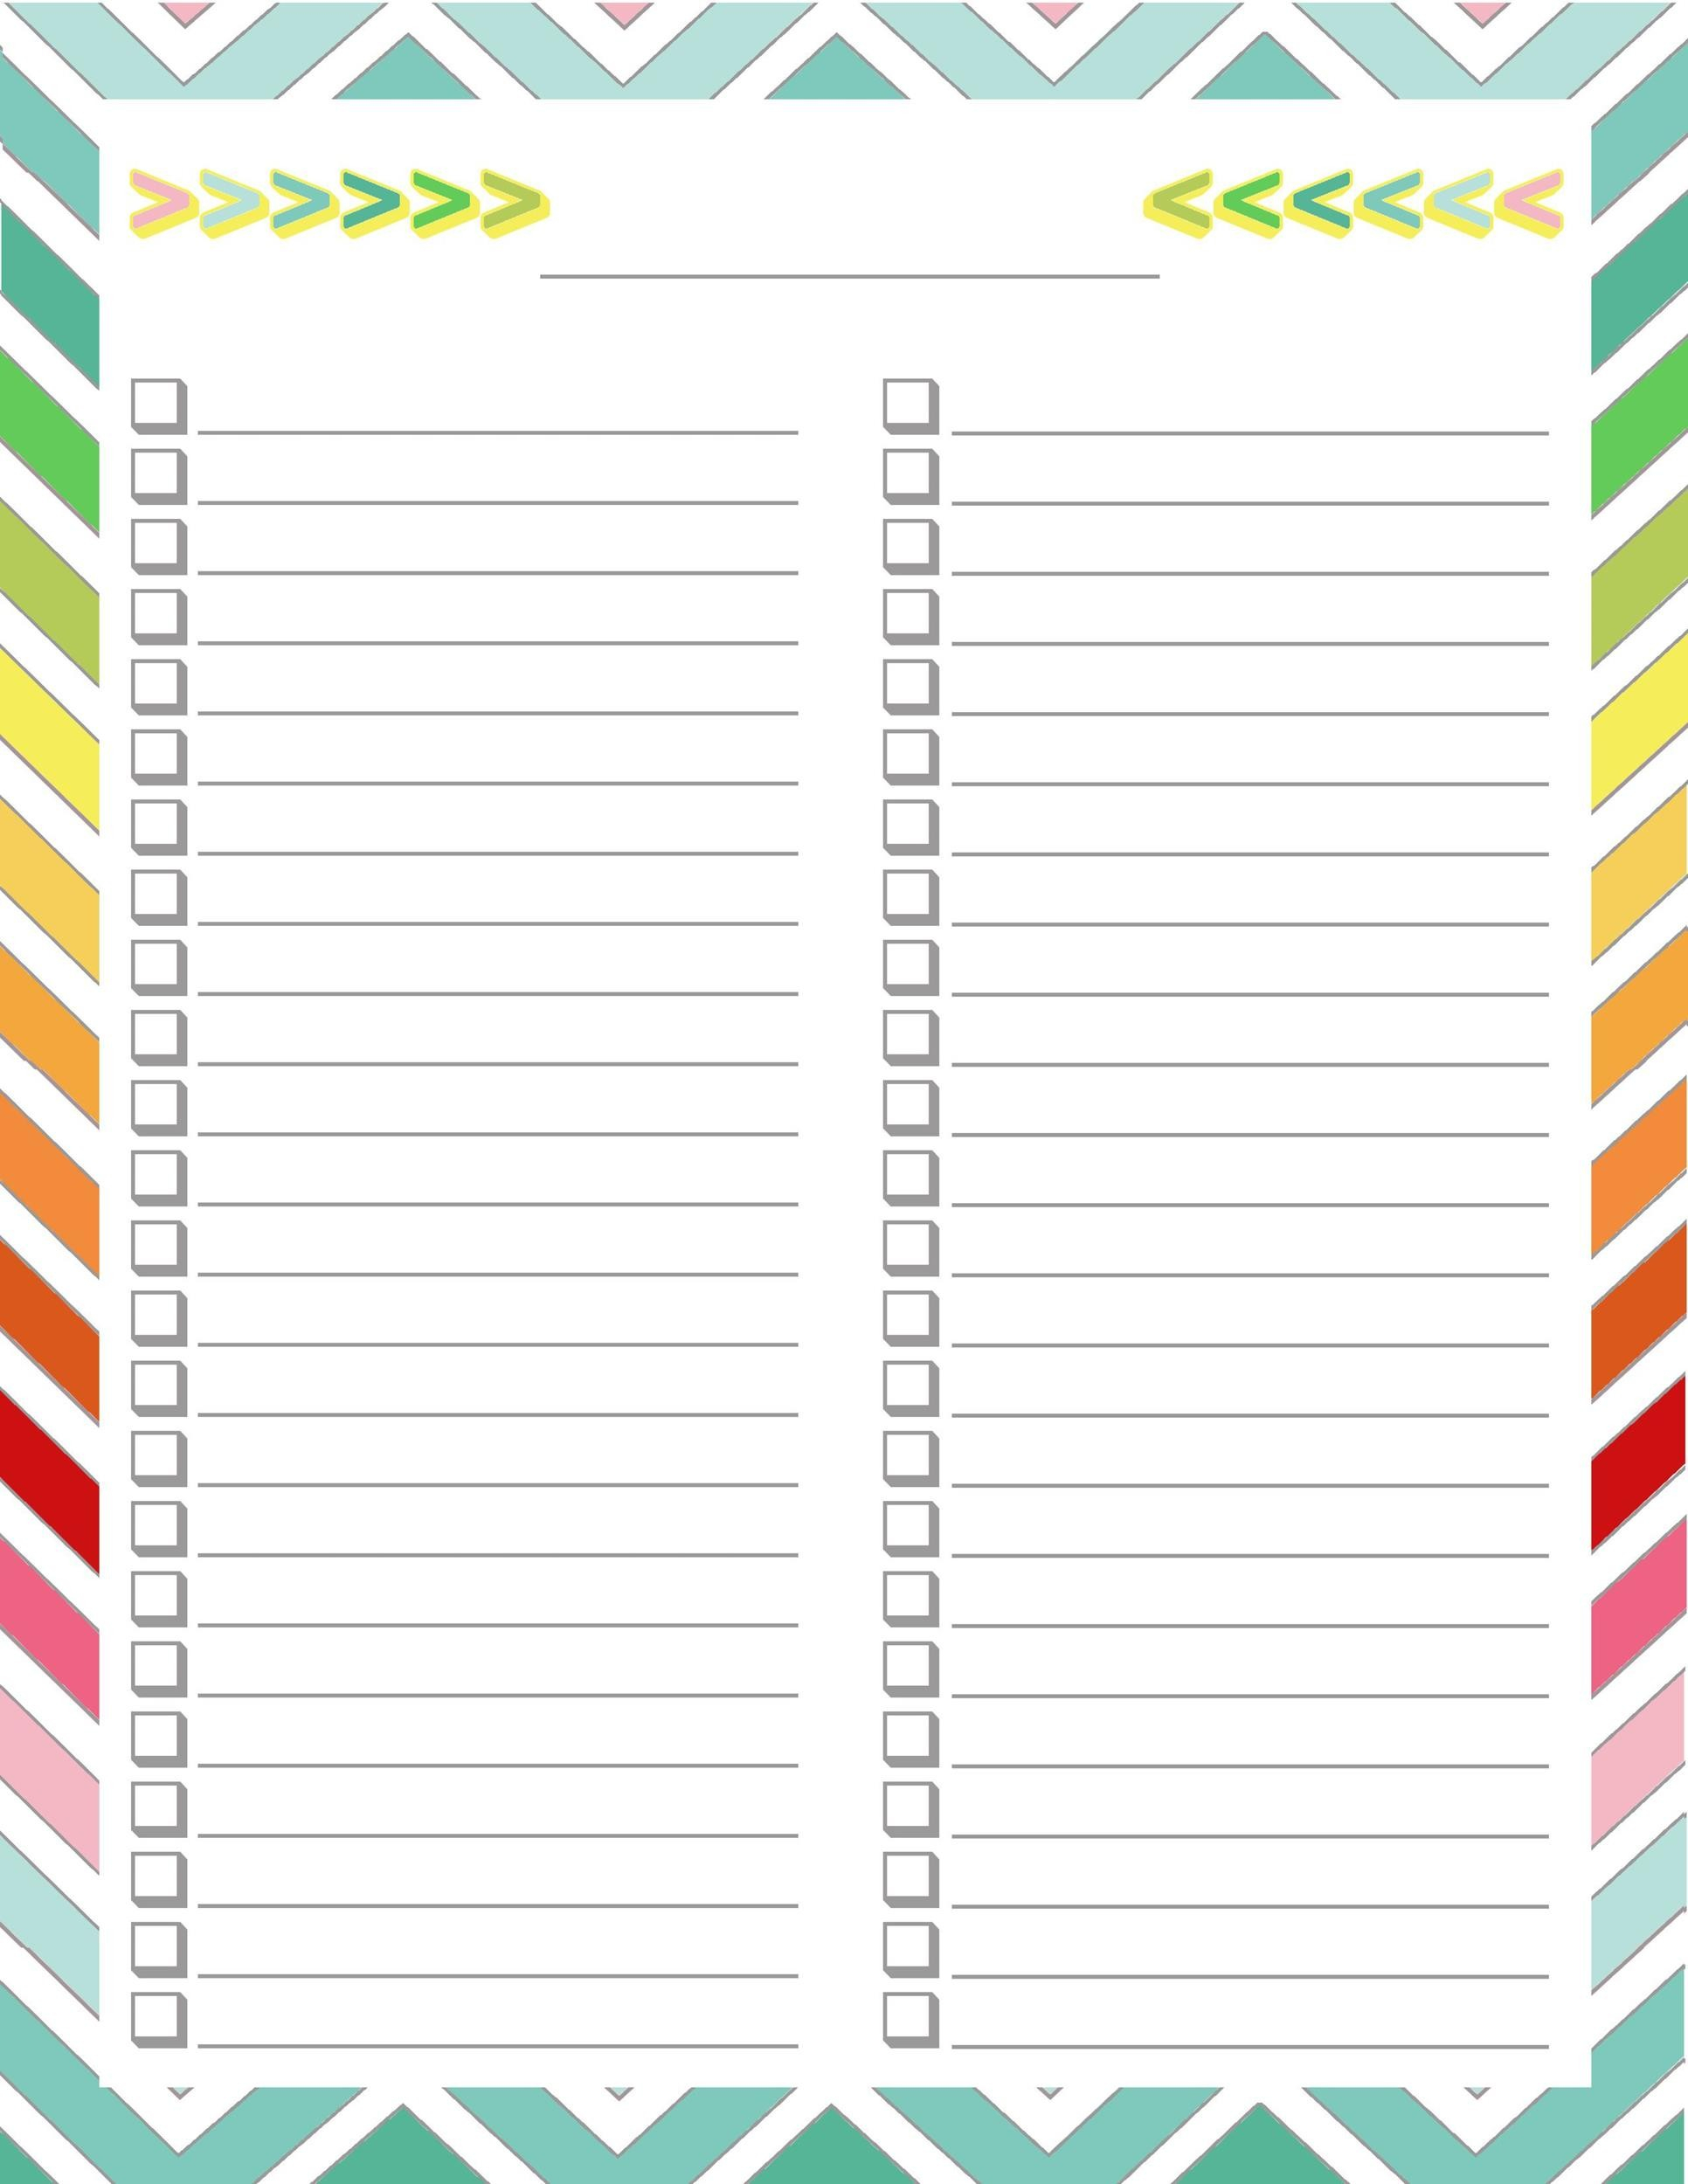 11 Printable To Do List & Checklist Templates (Excel, Word, PDF) Intended For Checklist With Boxes Template Regarding Checklist With Boxes Template